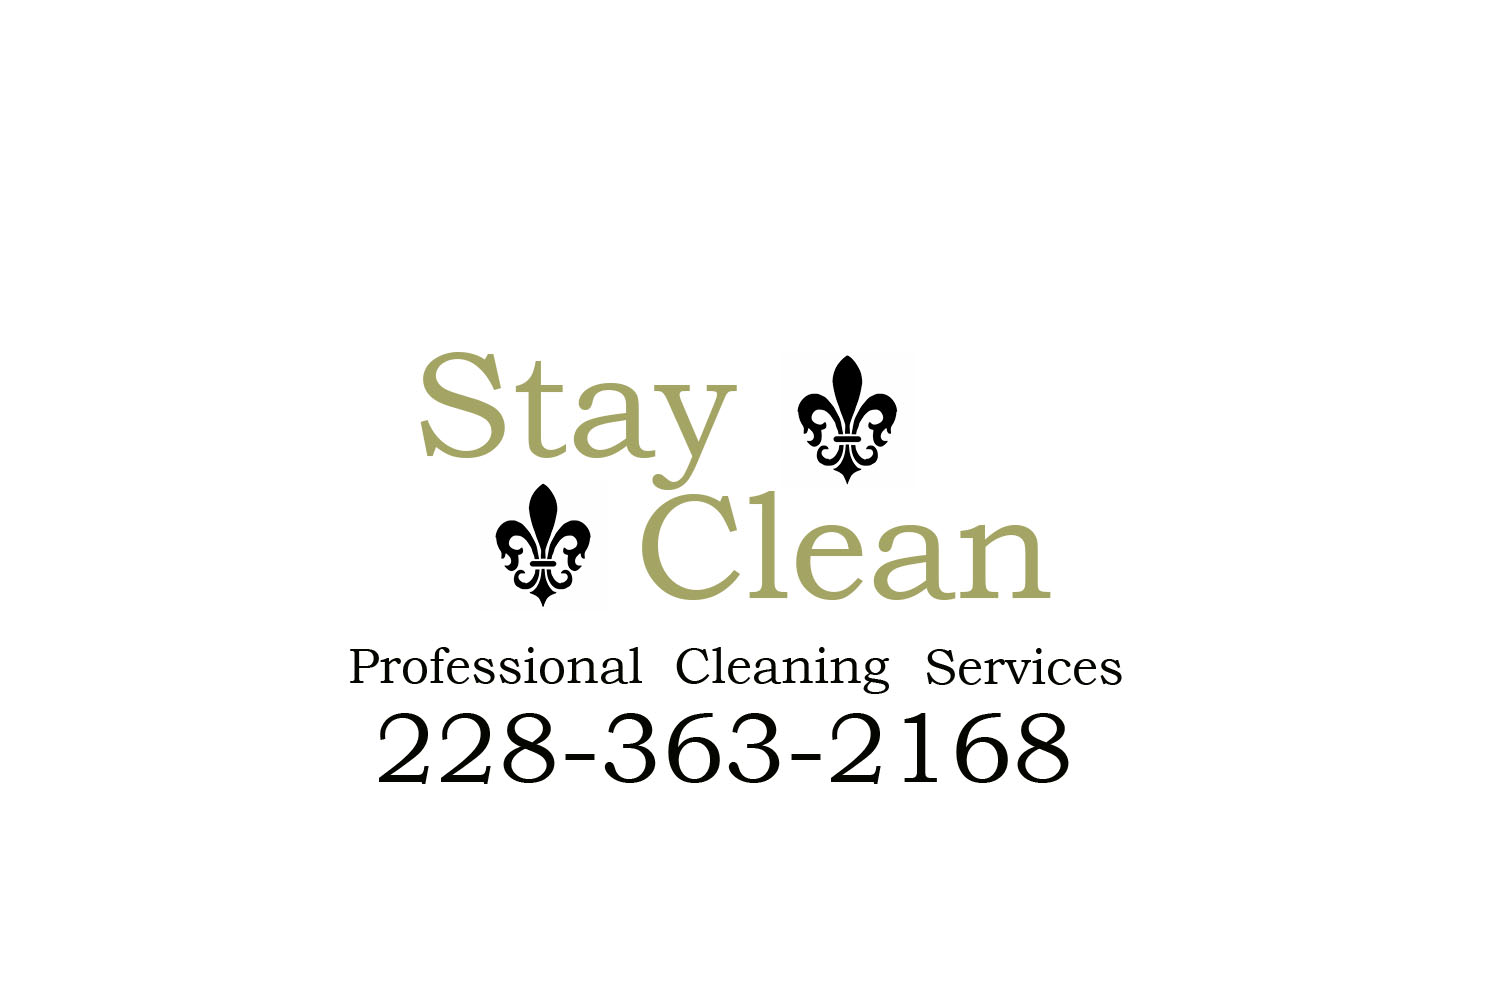 Stay Clean Professional Cleaning Services